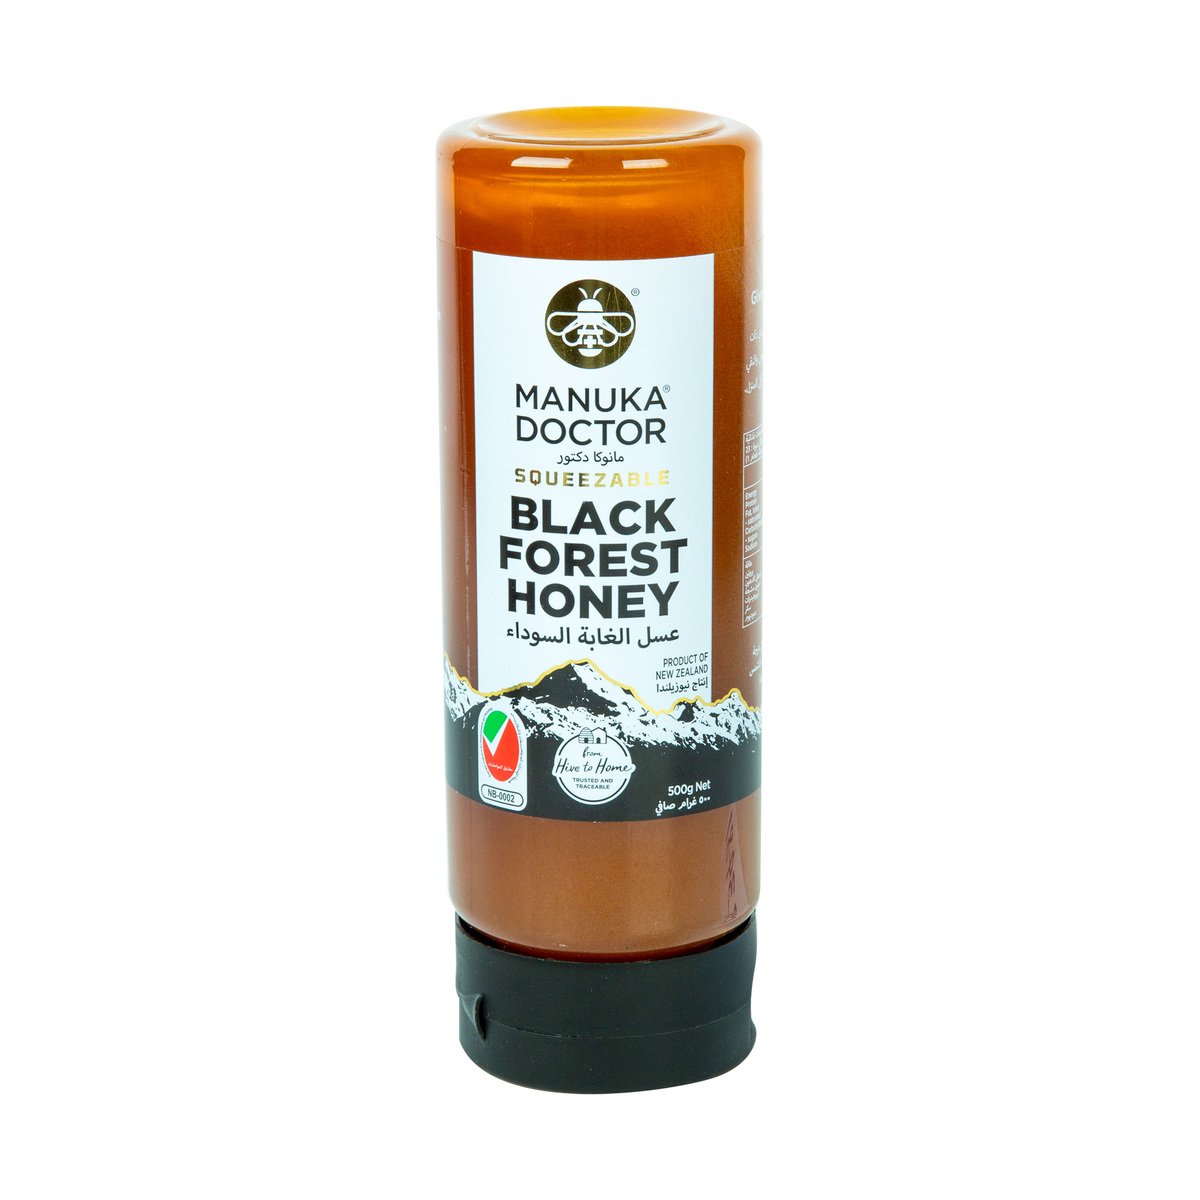 Manuka Doctor Squeezable Black Forest Honey 500 g